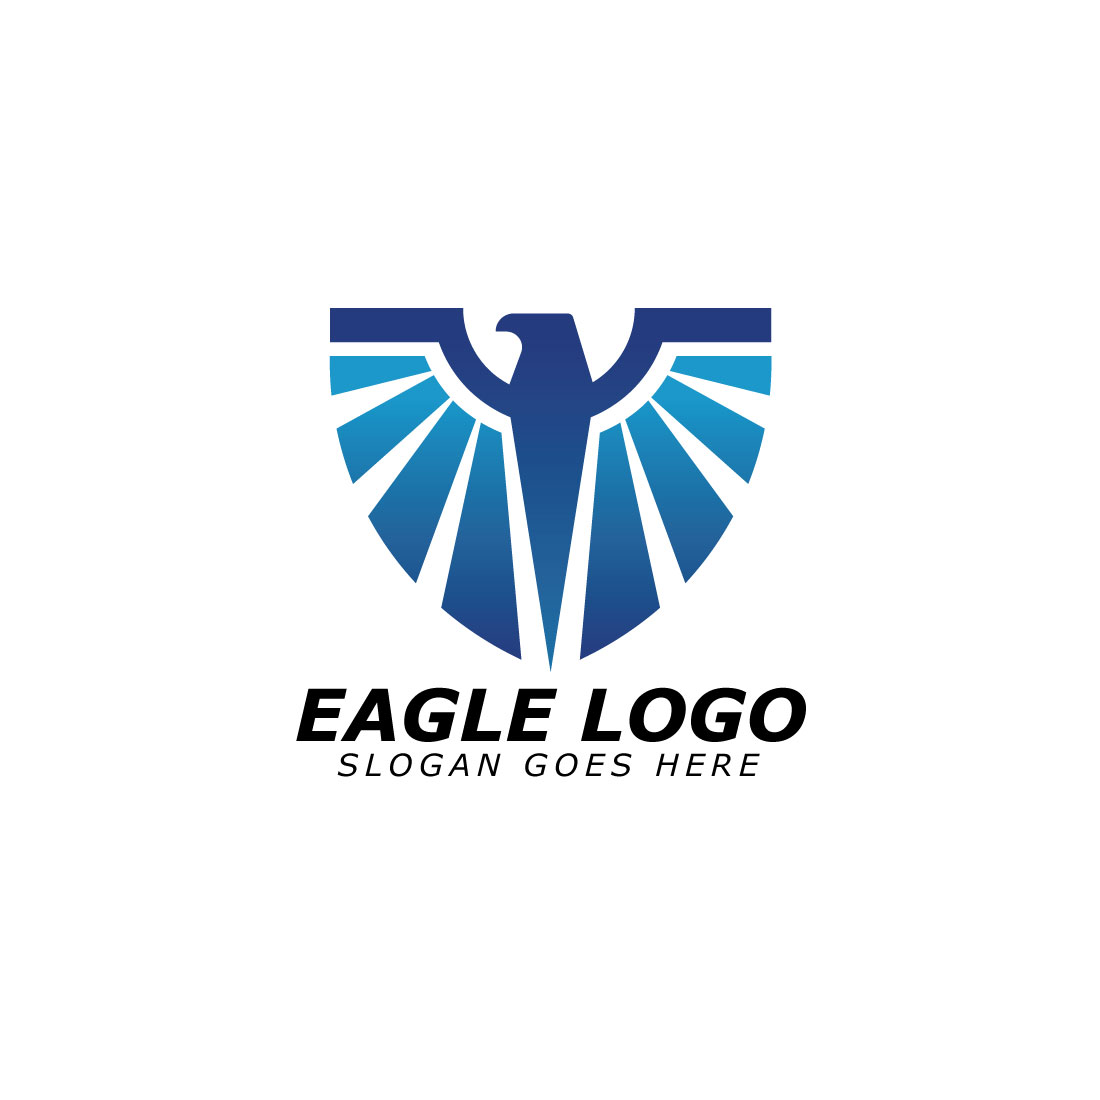 Eagle logo template with a shield design Vector illustration preview image.